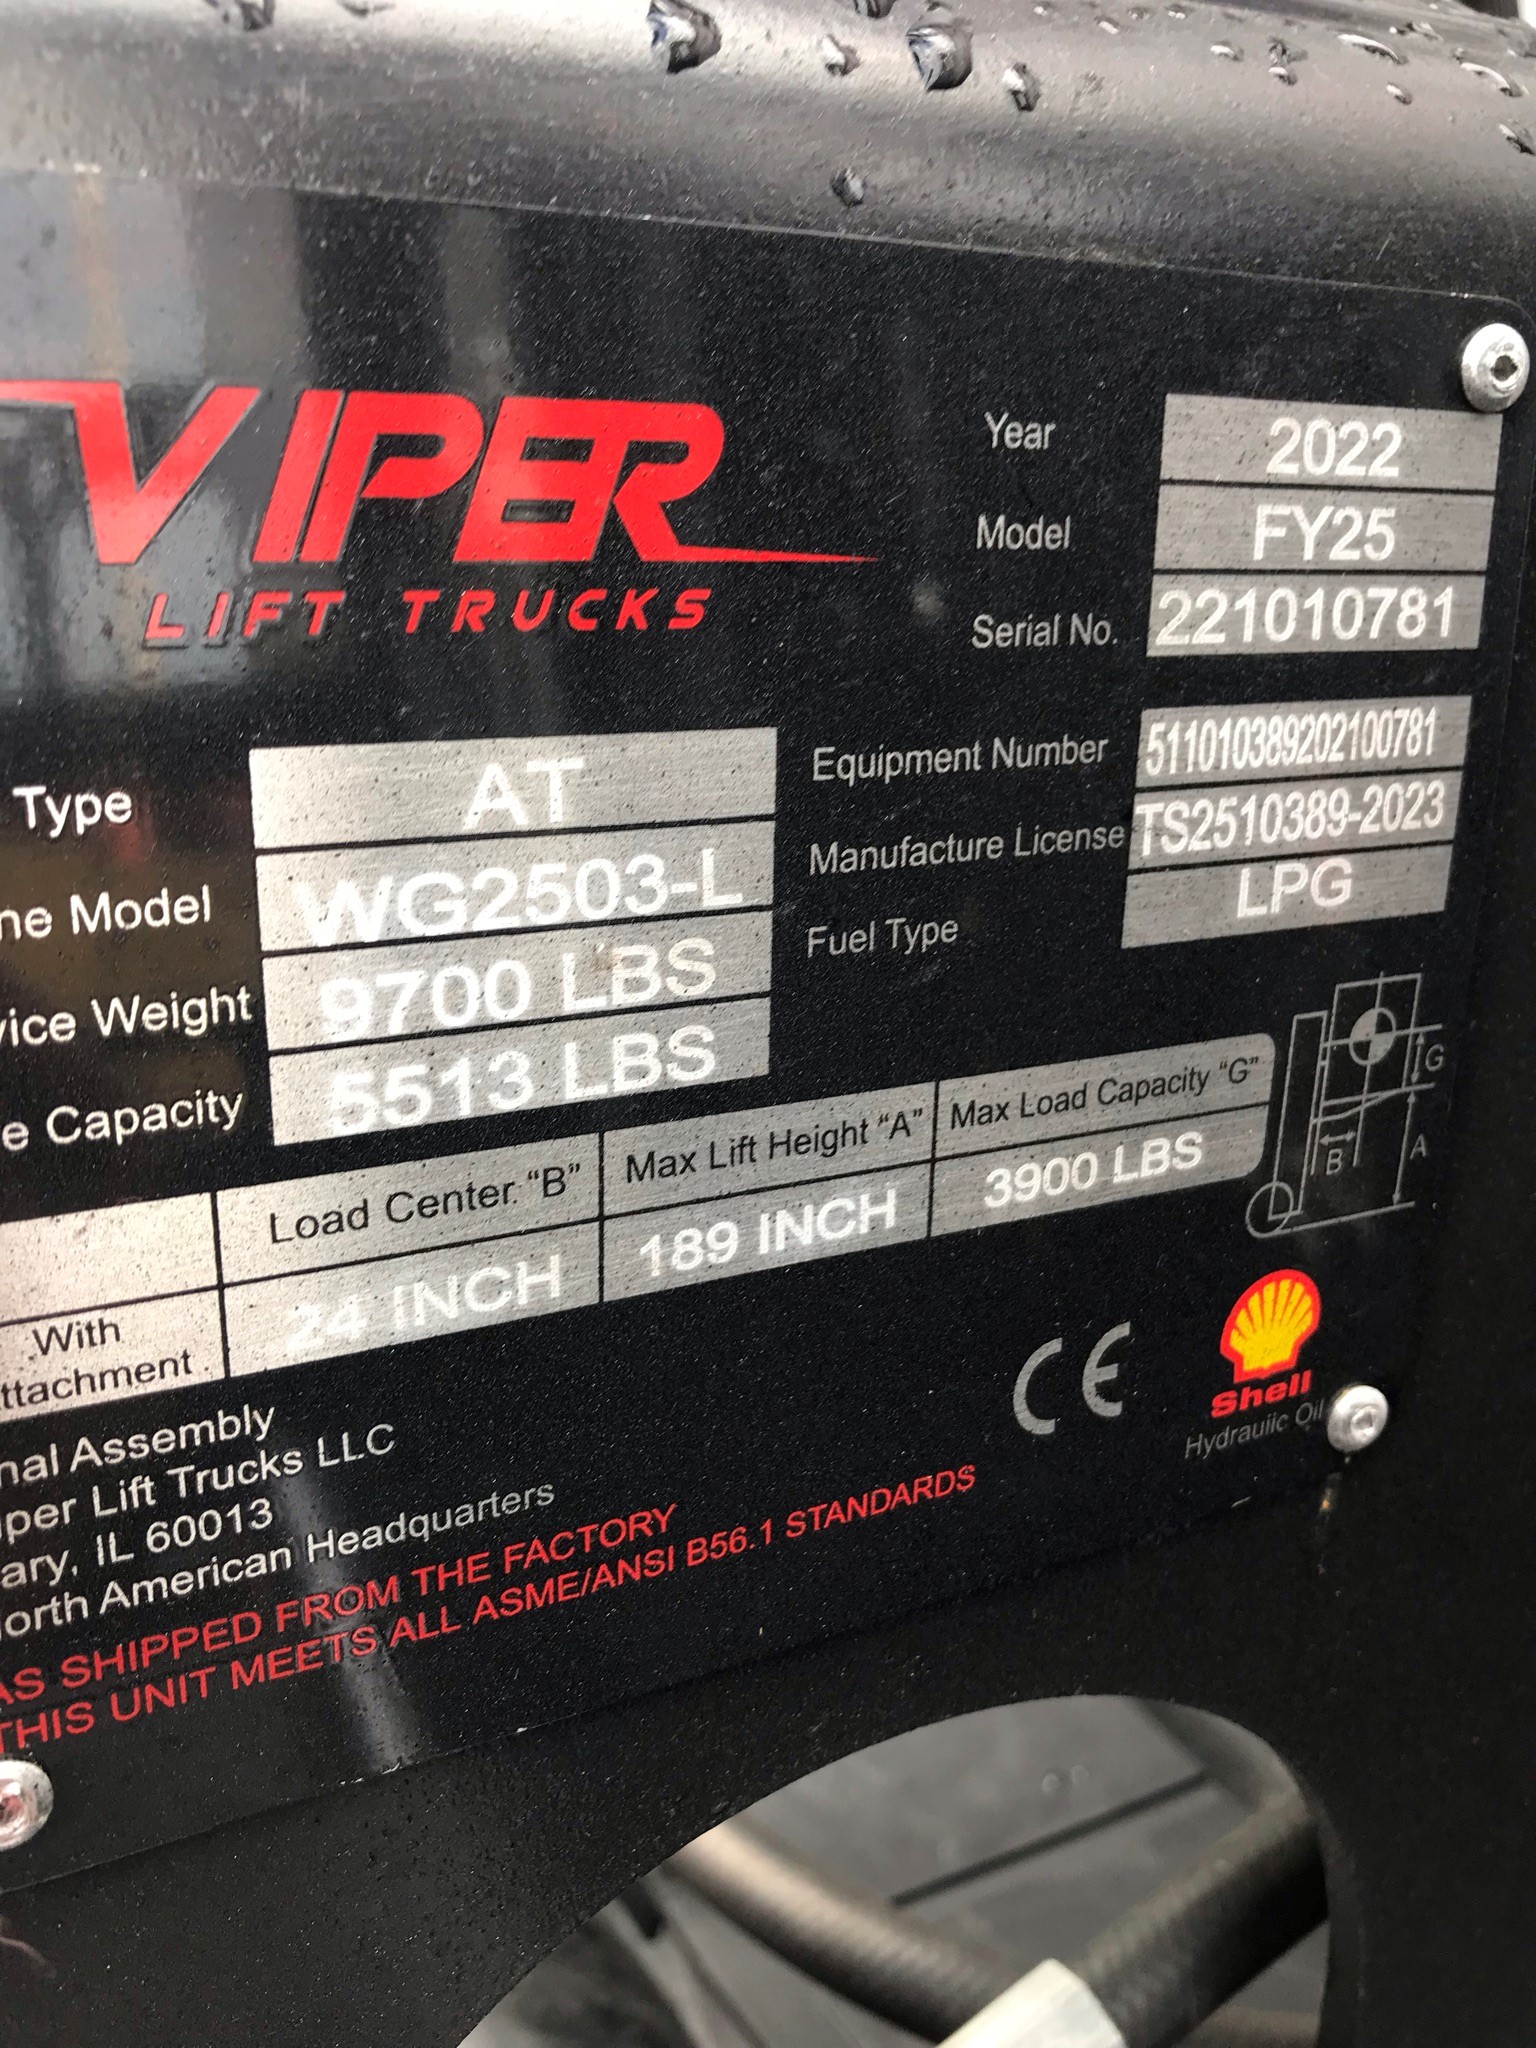 Model FY25 white viper forklift with serial number 221010781 for sale